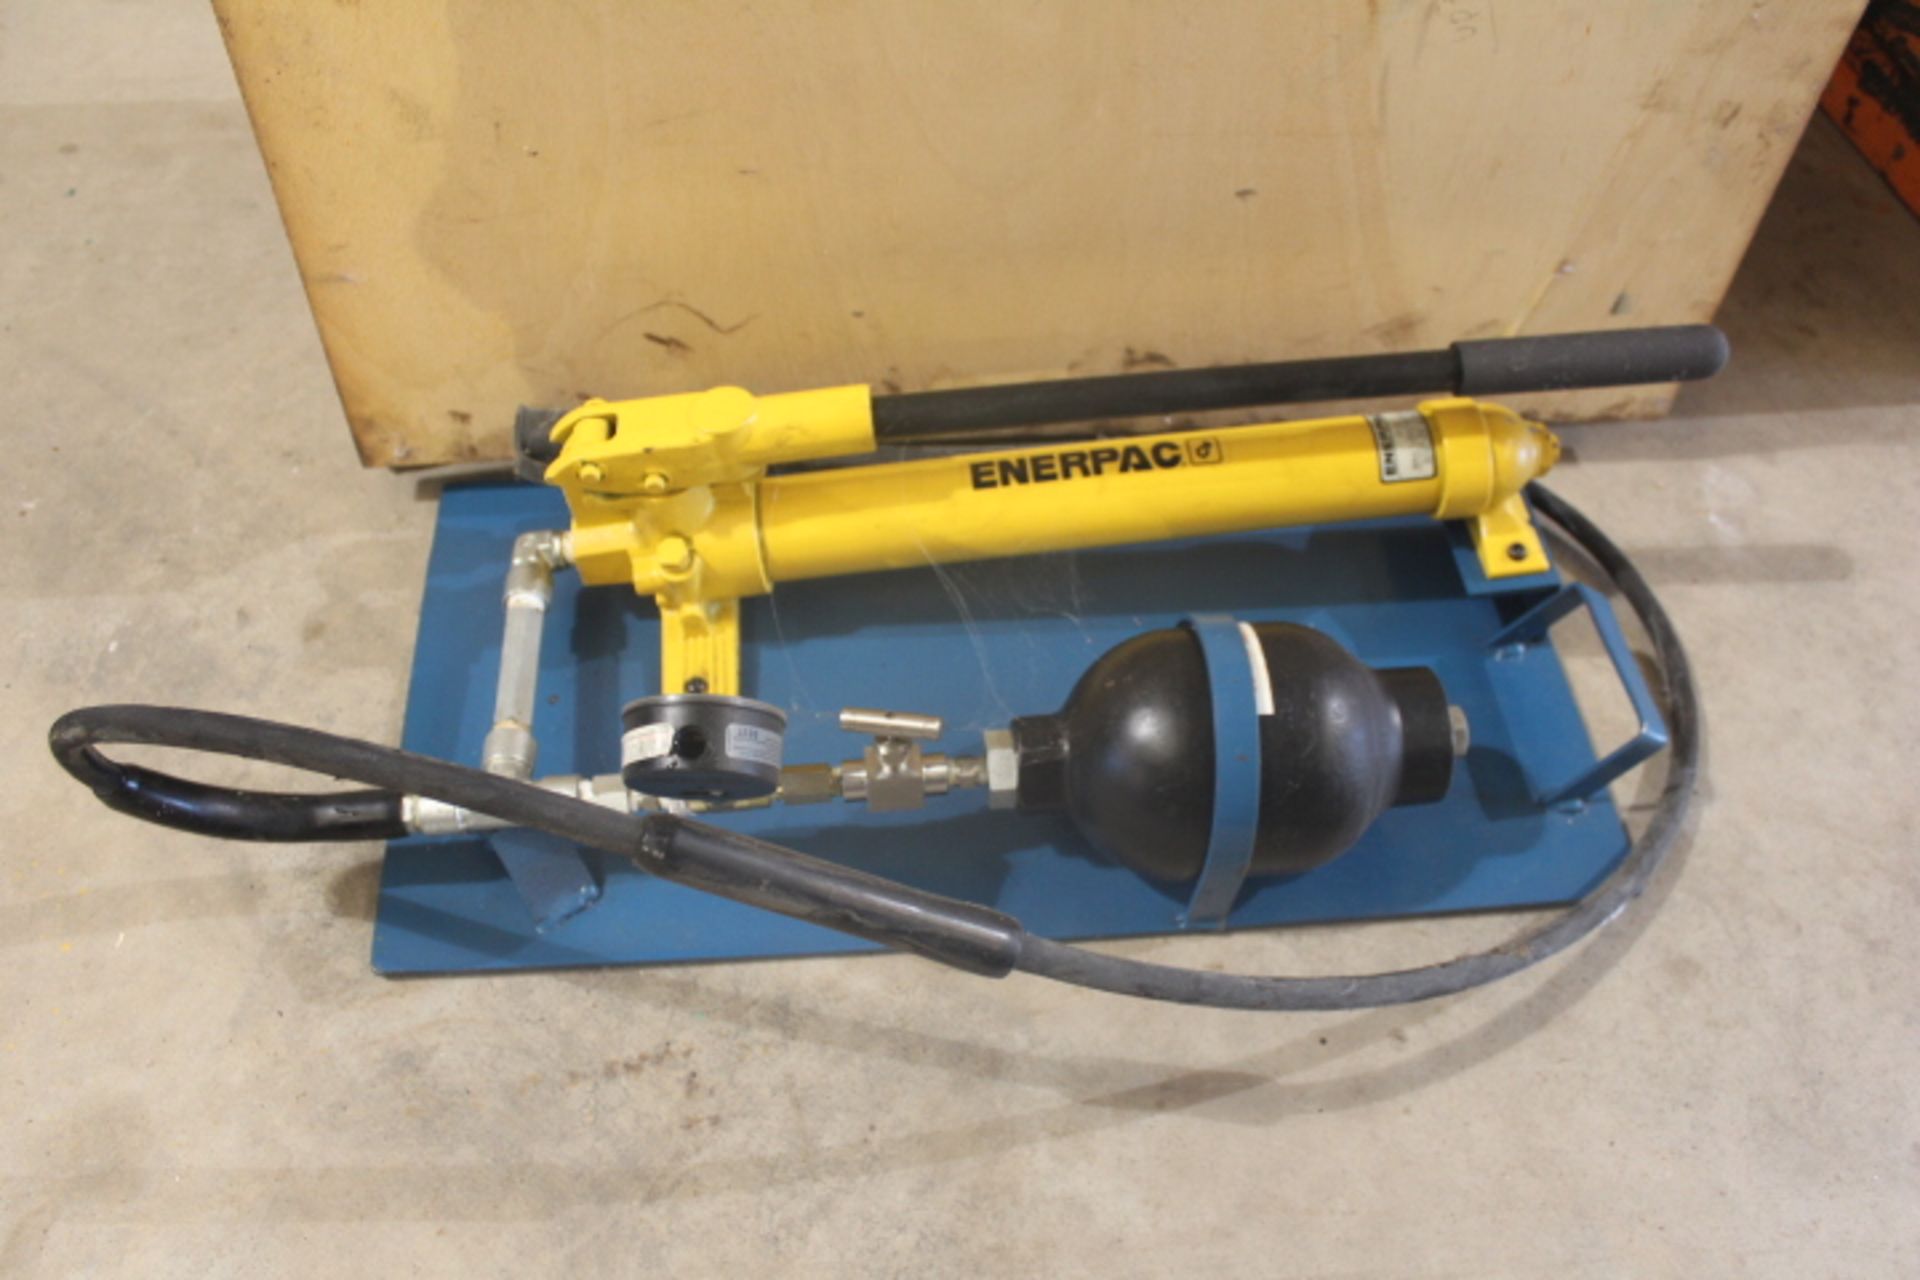 MANUAL THREAD COLD ROLLING TOOL, ENERPAC - Image 2 of 3